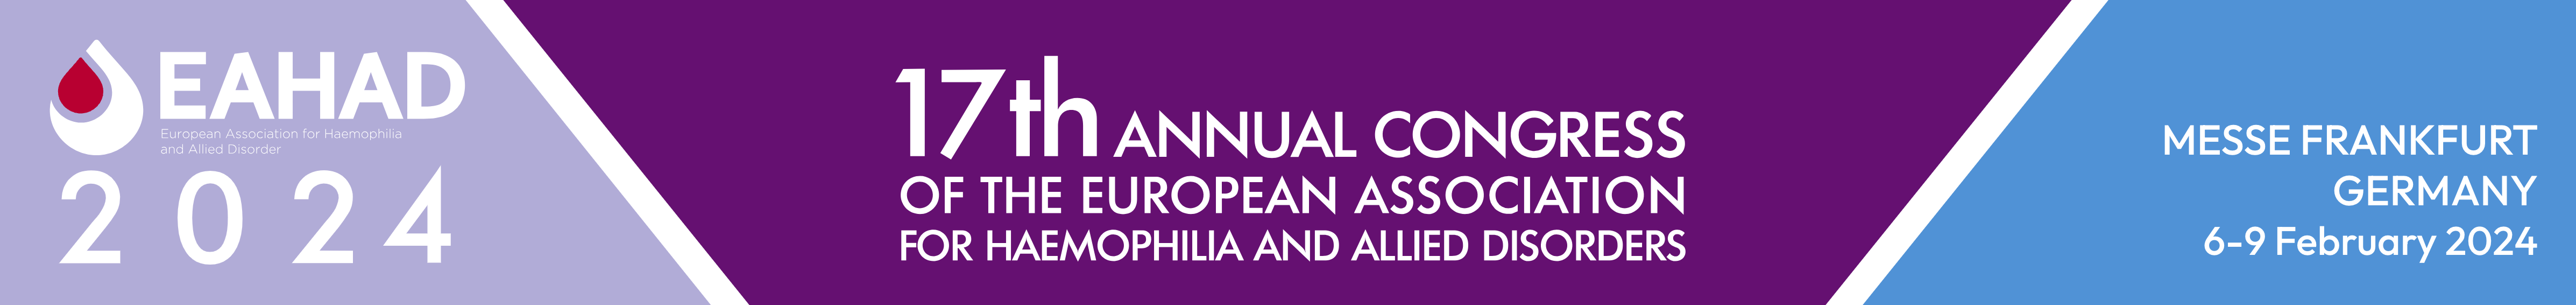 The 17th Annual Congress of the European Association for Haemophilia and Allied Disorders